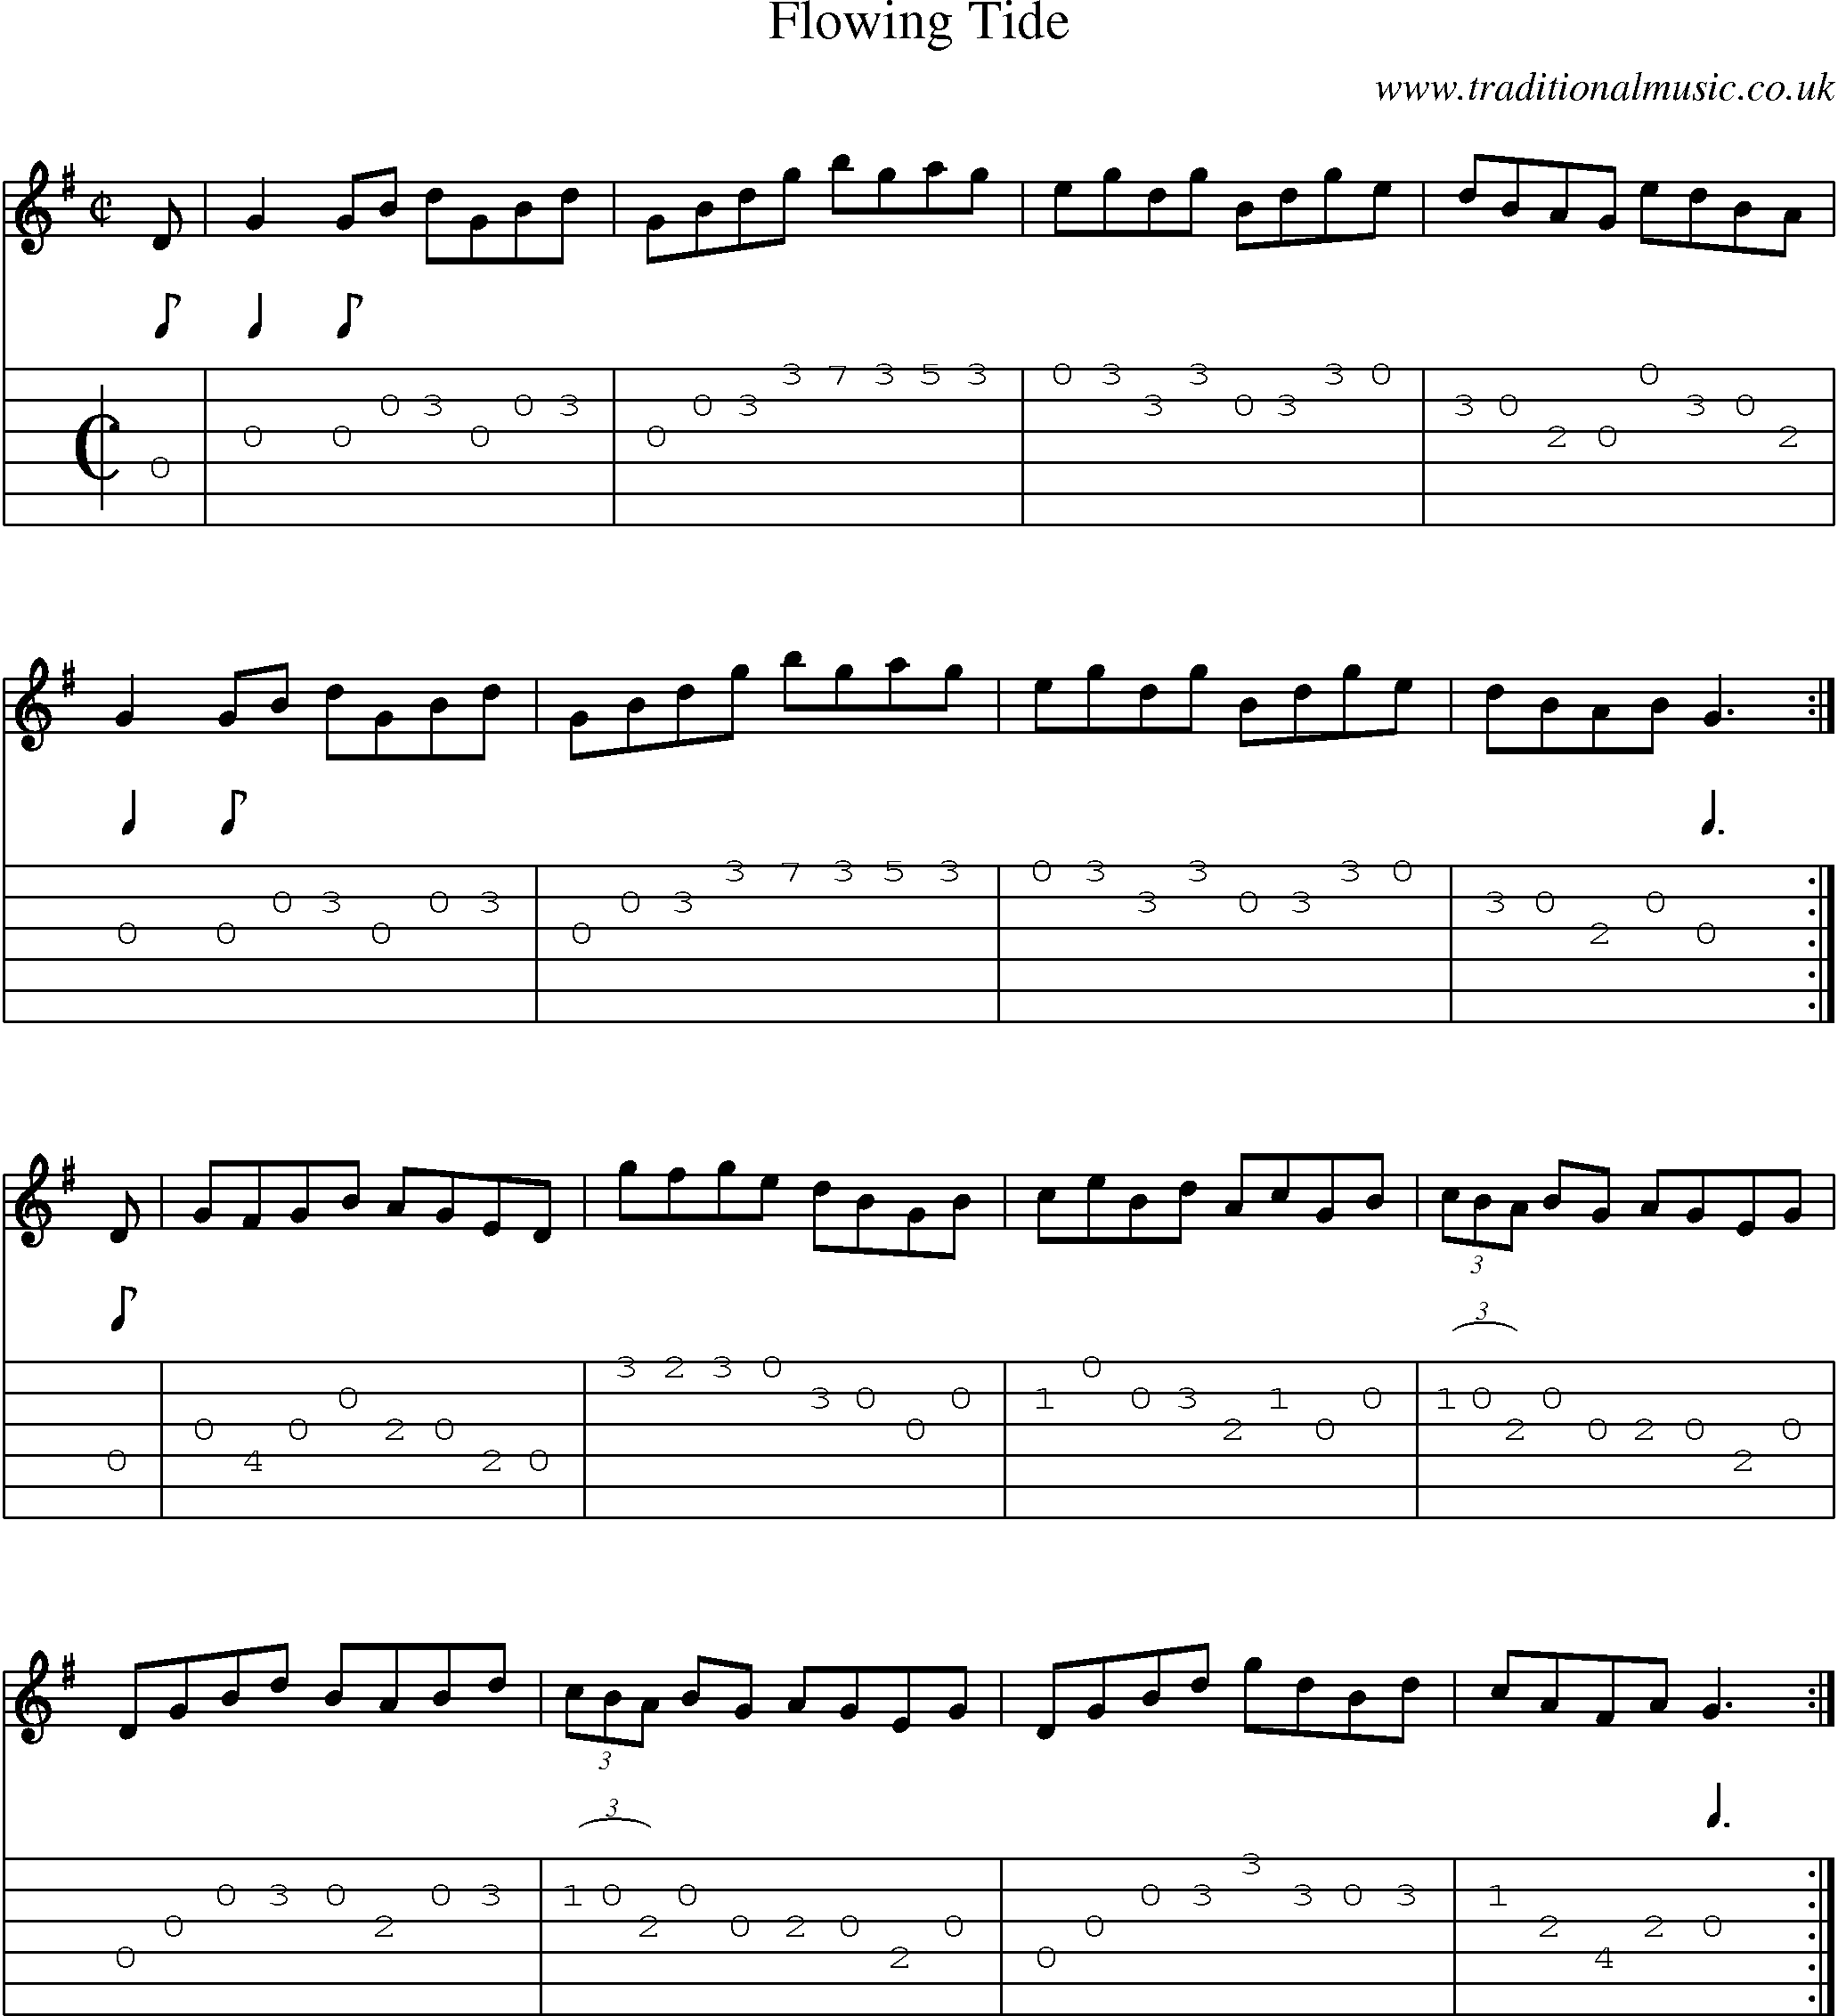 Music Score and Guitar Tabs for Flowing Tide